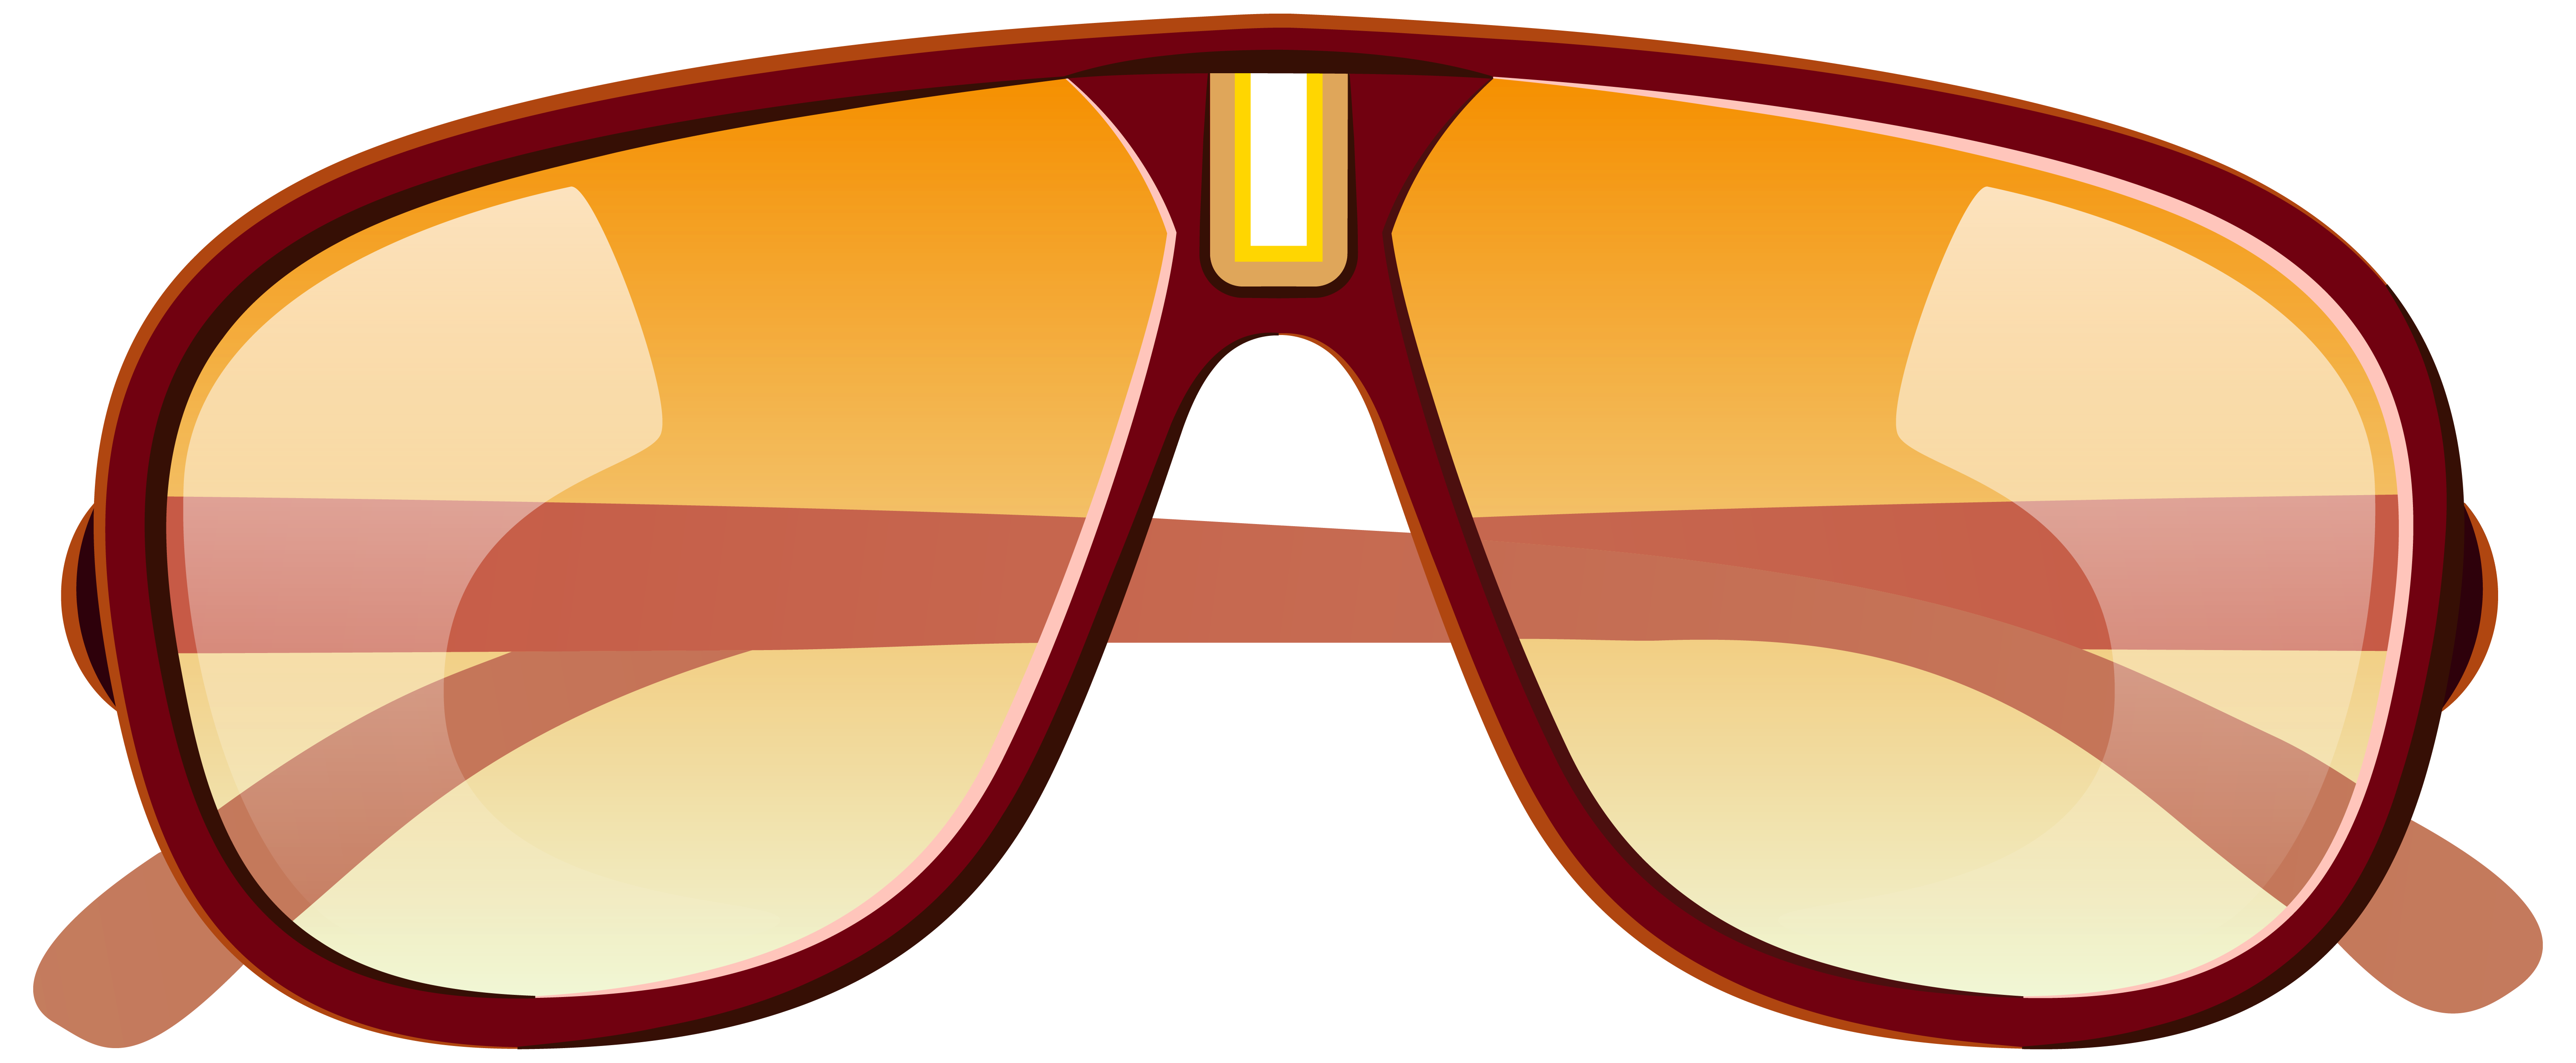 Glasses clipart sunglass. Large sunglasses png picture